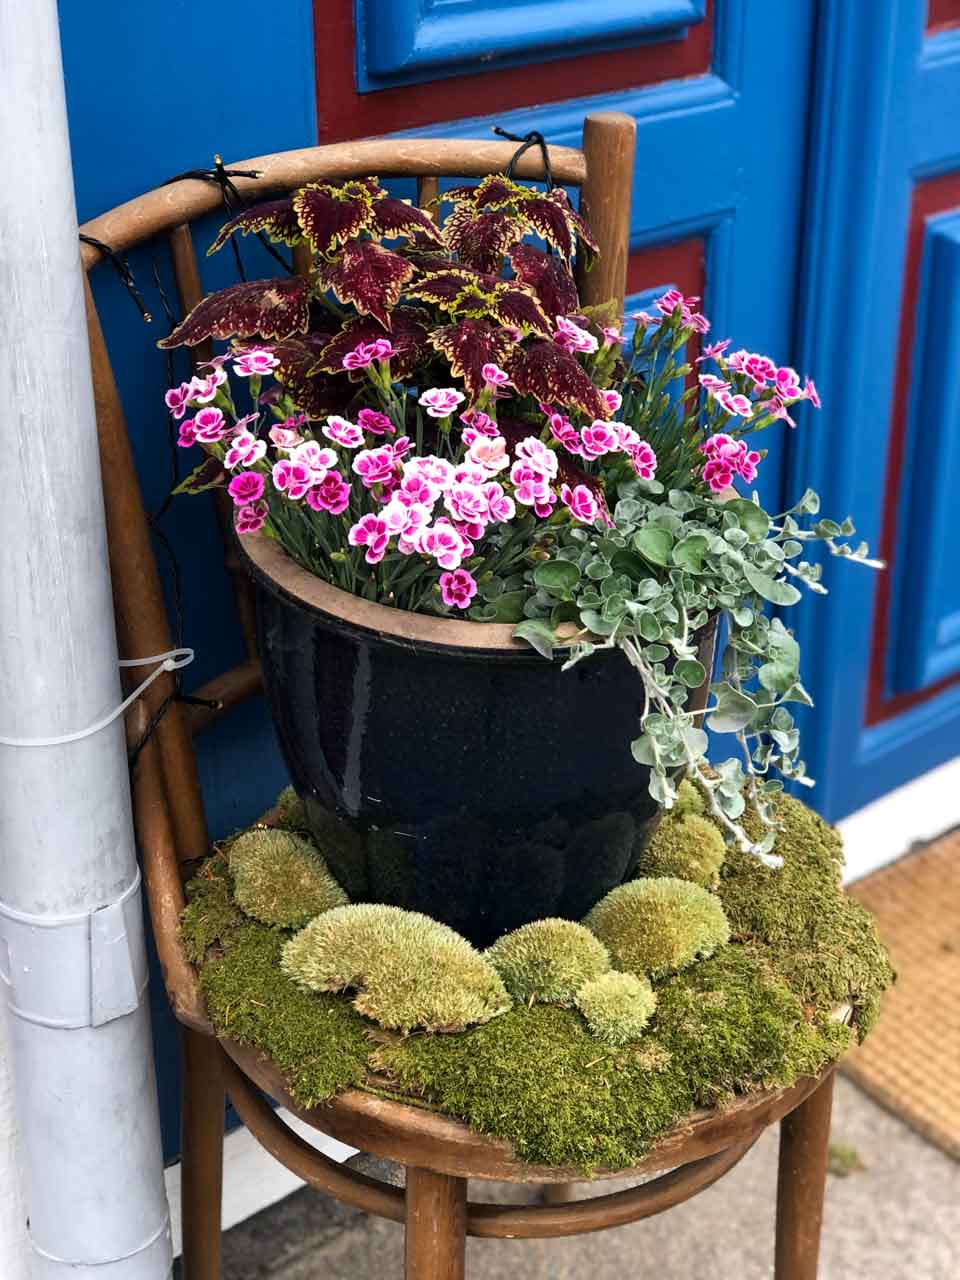 A close-up photo of a chair with moss and an outdoor plant pot on it outside a house in Karlskrona, Sweden